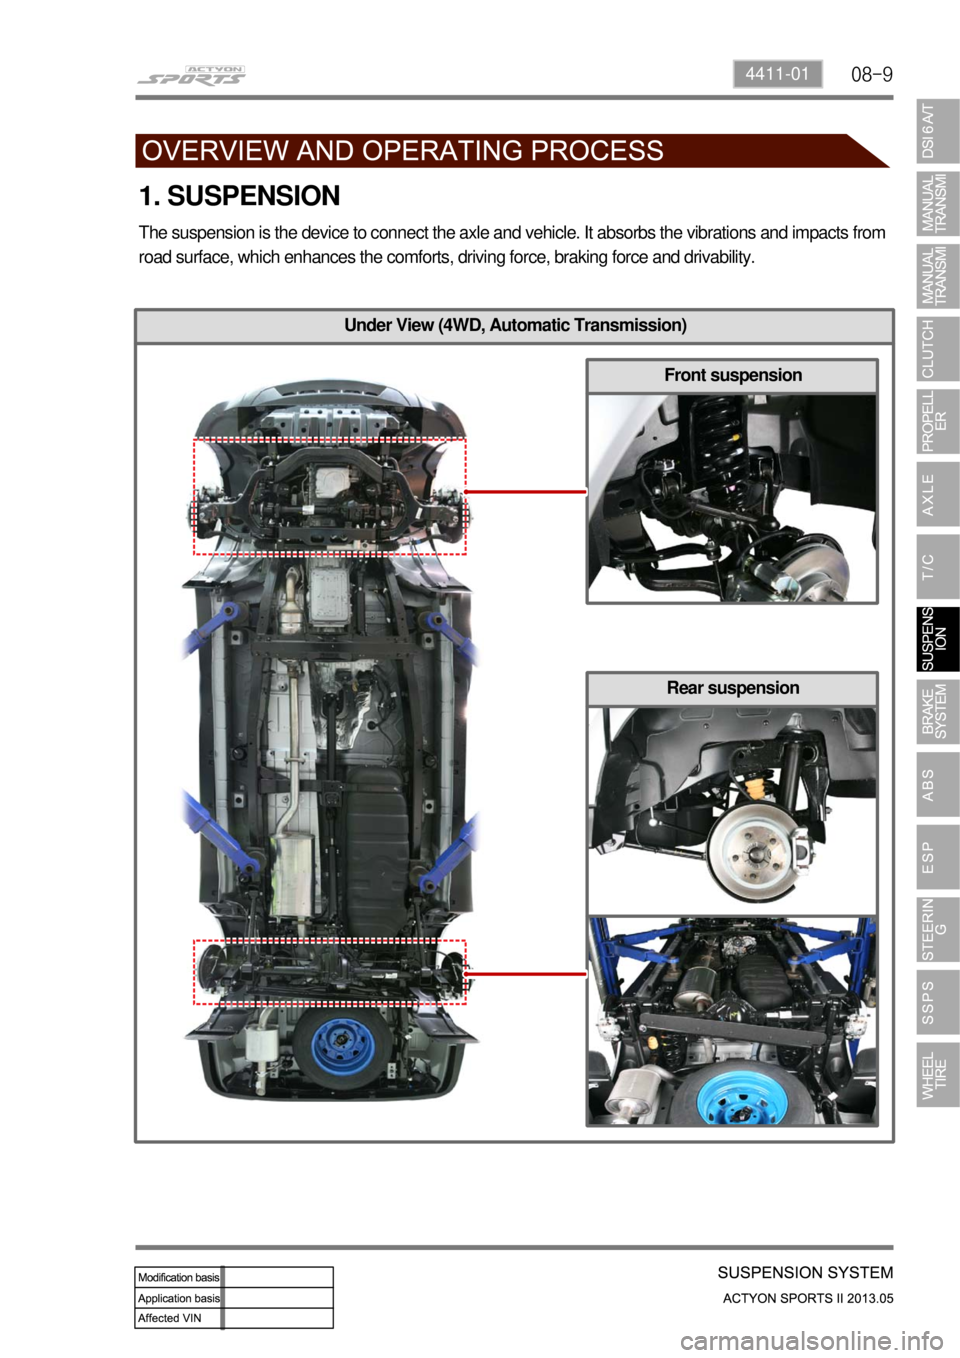 SSANGYONG NEW ACTYON SPORTS 2013  Service Manual 08-94411-01
Under View (4WD, Automatic Transmission)
Rear suspension
1. SUSPENSION
The suspension is the device to connect the axle and vehicle. It absorbs the vibrations and impacts from 
road surfac